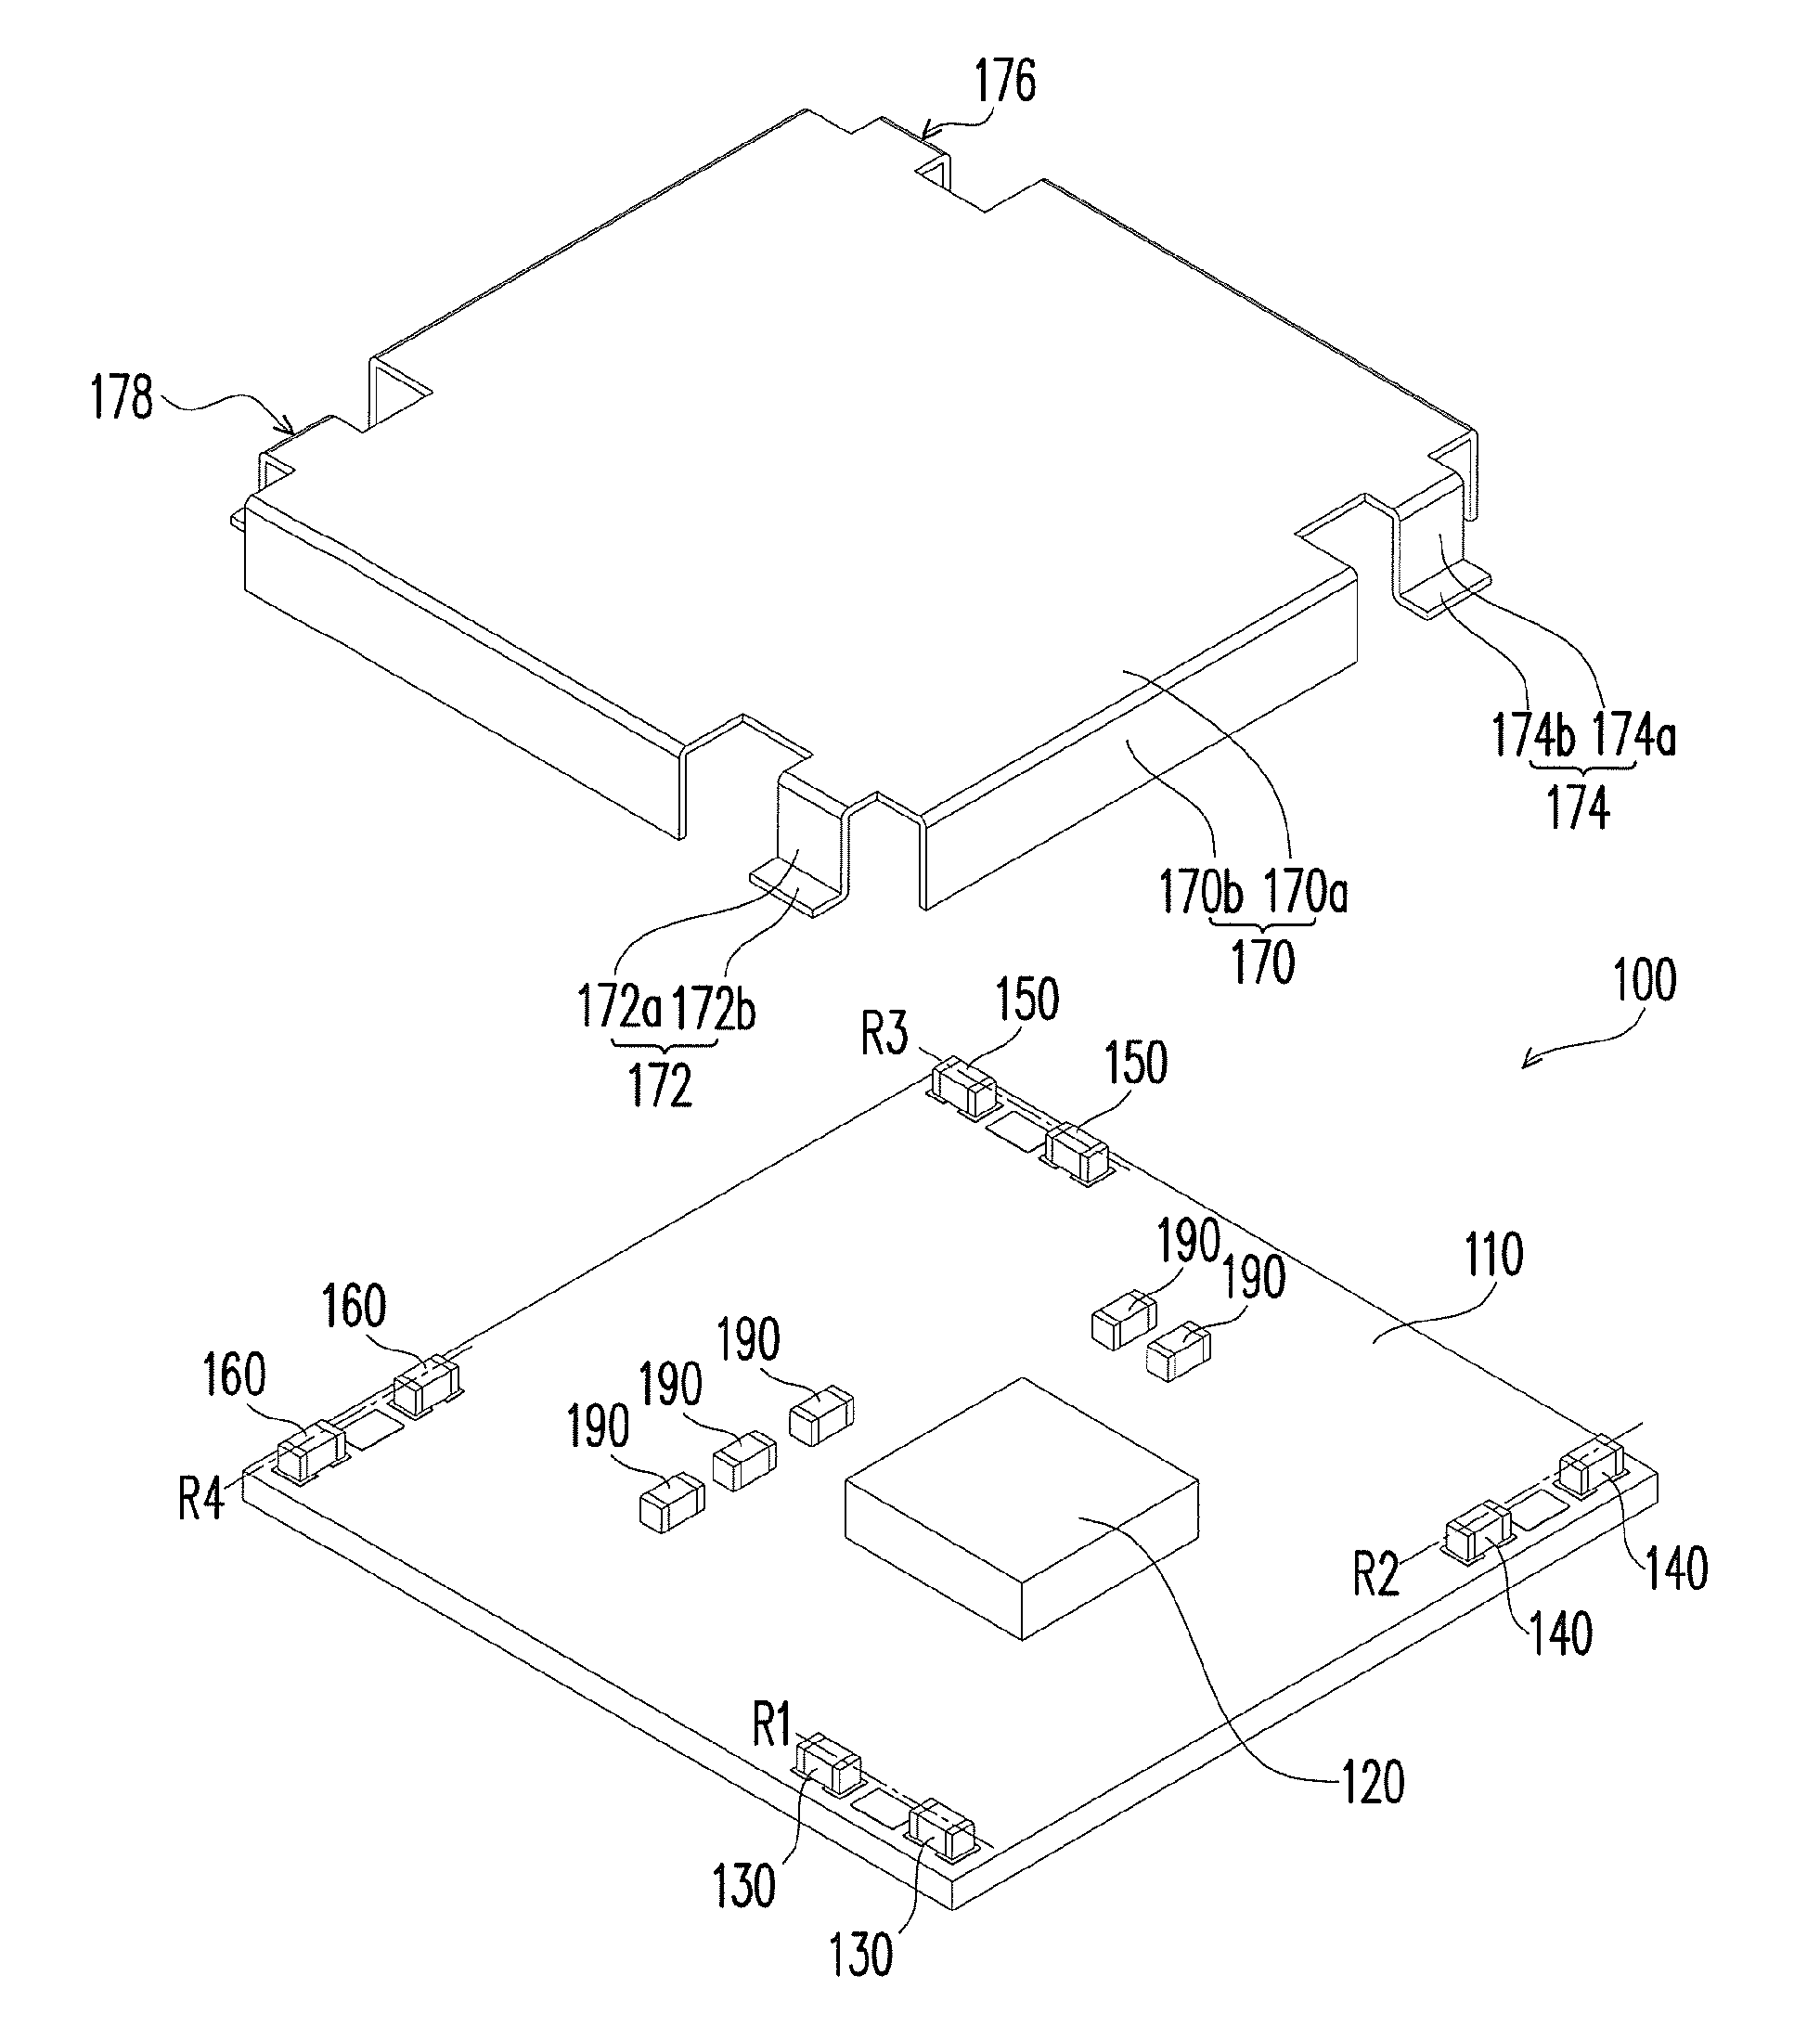 Chip package structure with shielding cover